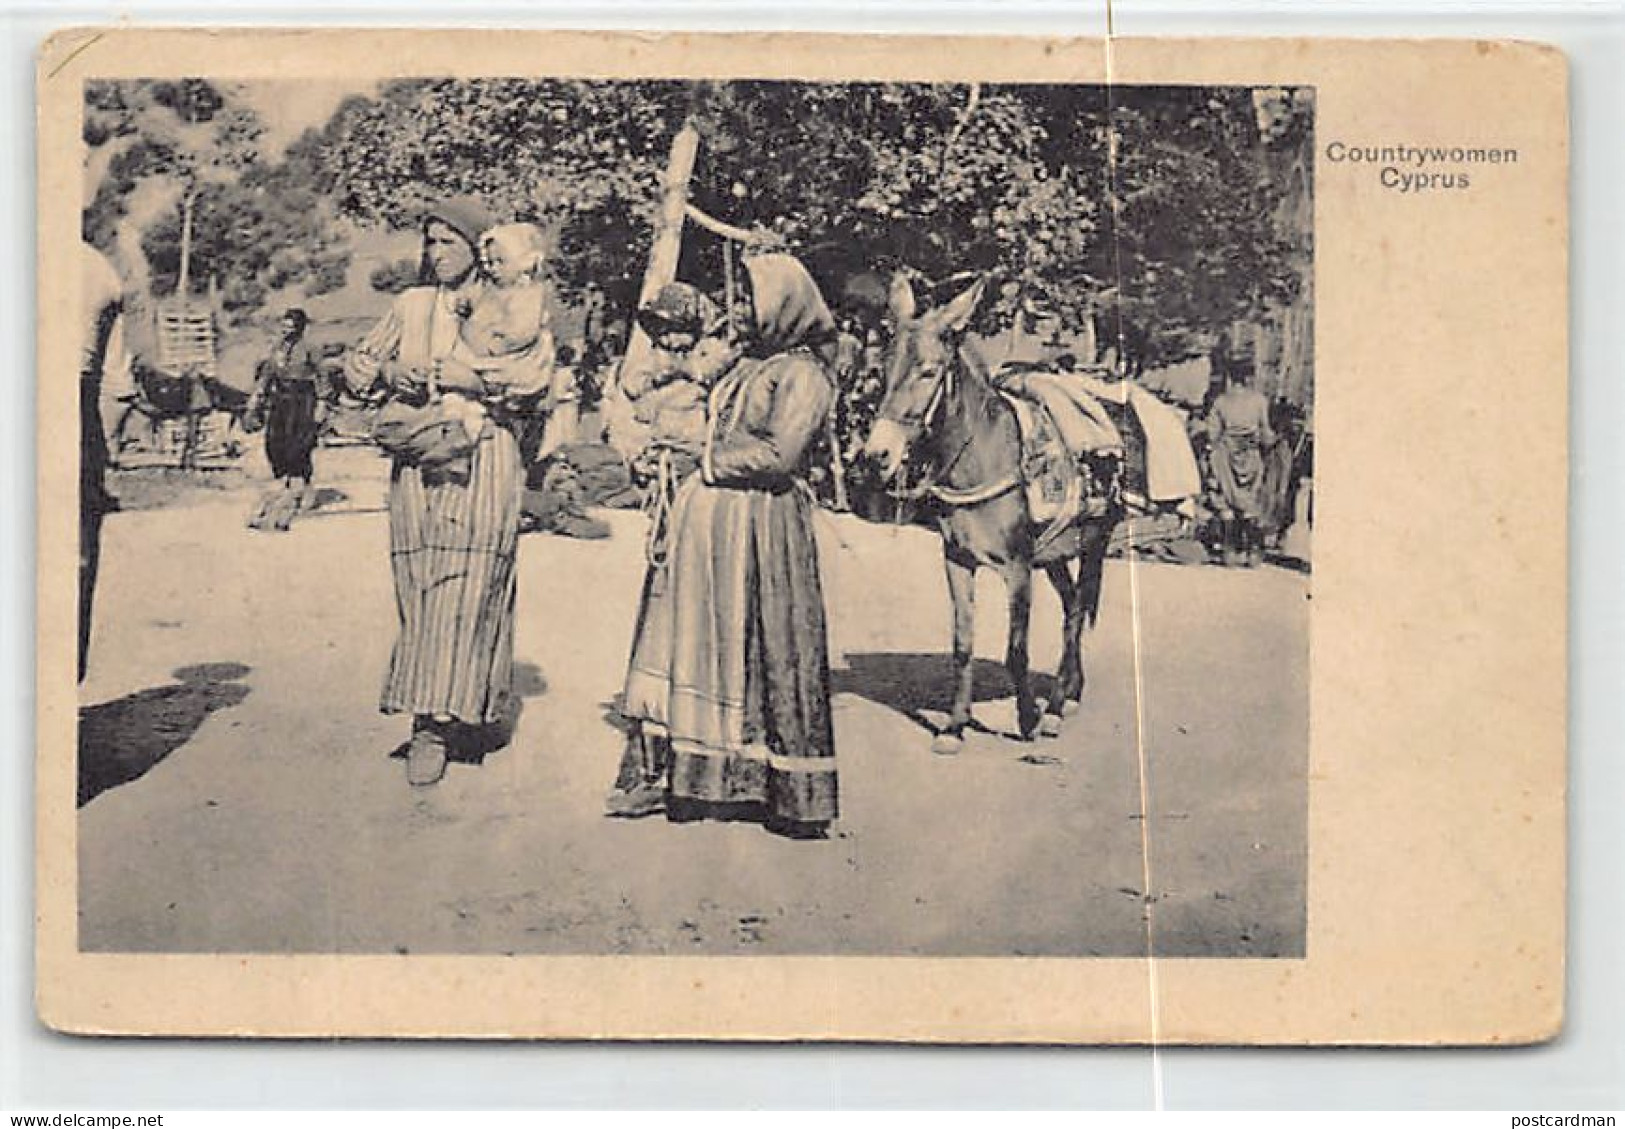 Cyprus - Countrywomen - SEE SCANS FOR CONDITION - Publ. J. P. Foscolo - Cyprus